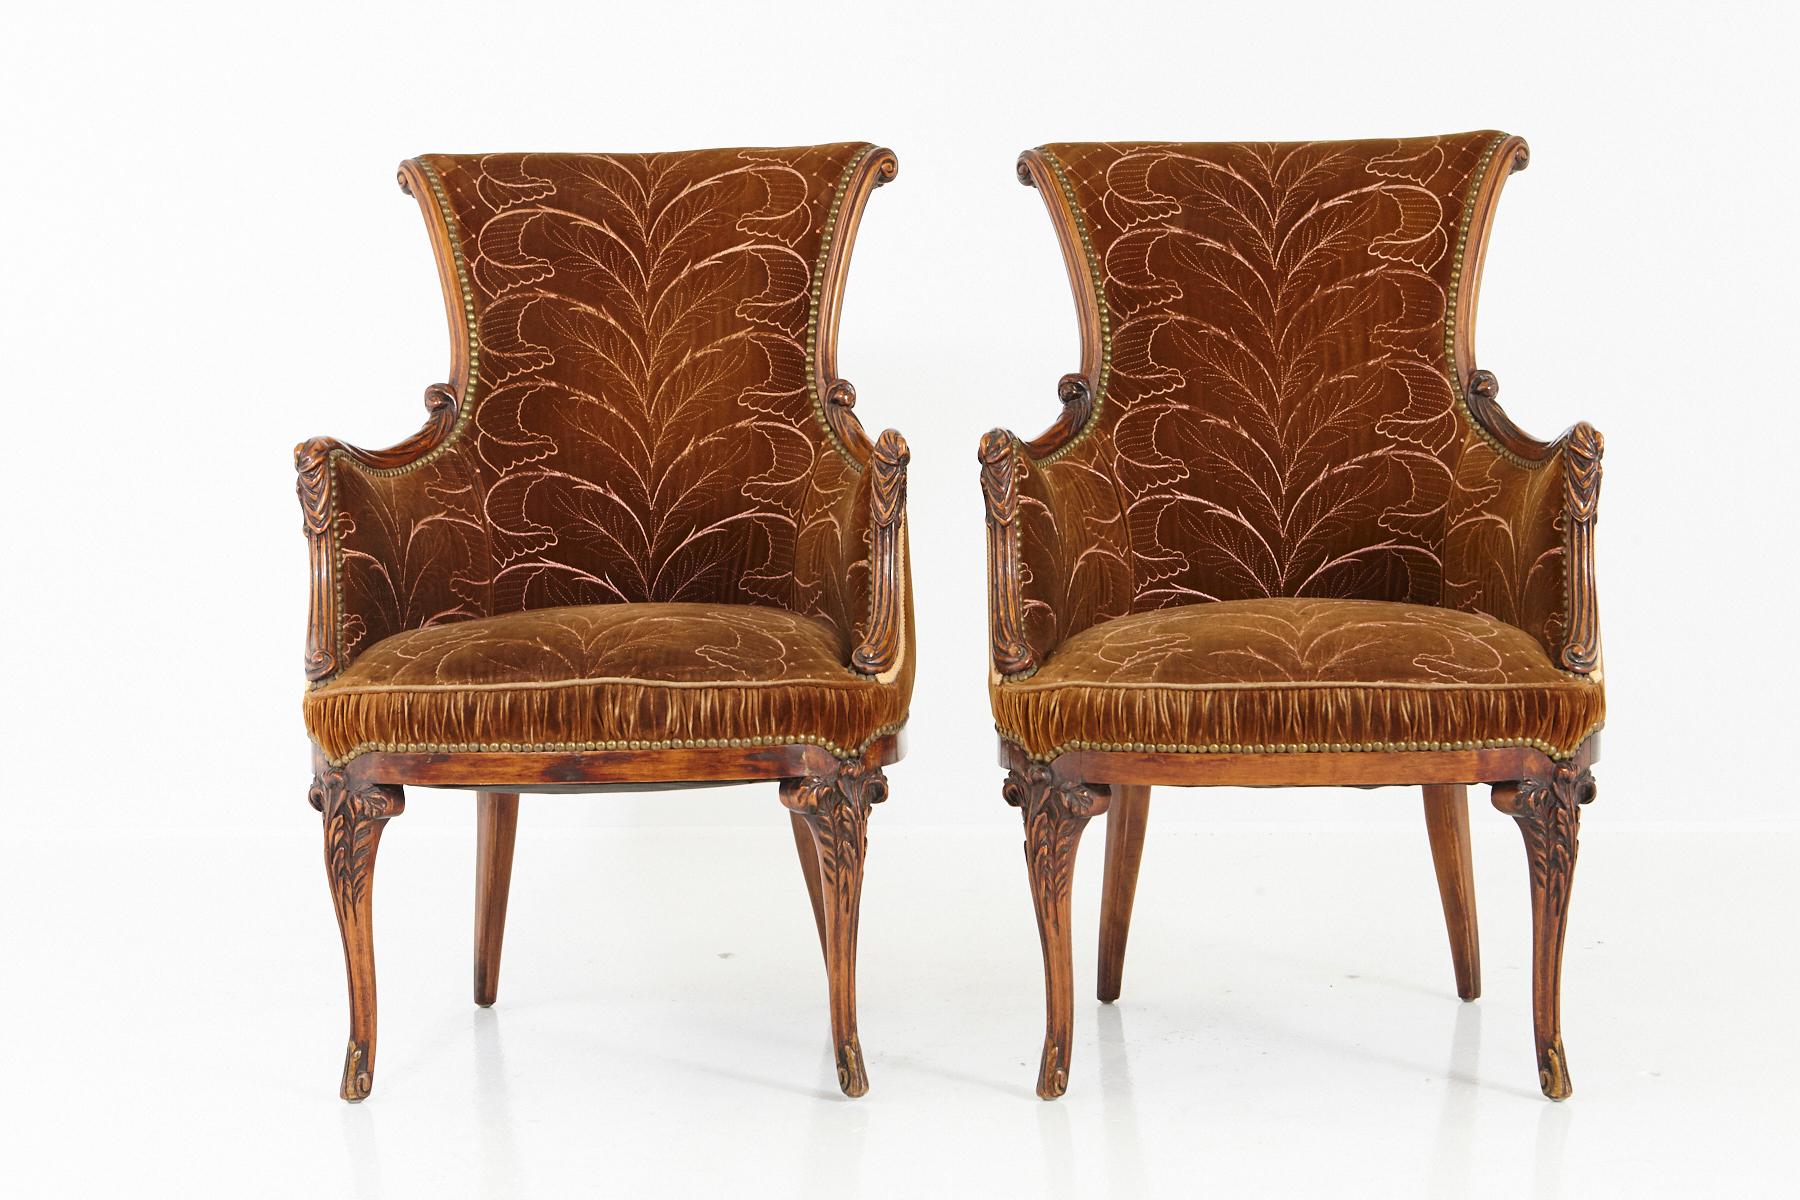 Exceptional pair of French Art Nouveau armchairs upholstered in a richly decorated two-tone cognac-colored velvet, France, circa 1900. The inner part of the chair is covered in embroidered velvet, while the outside is covered in a lighter